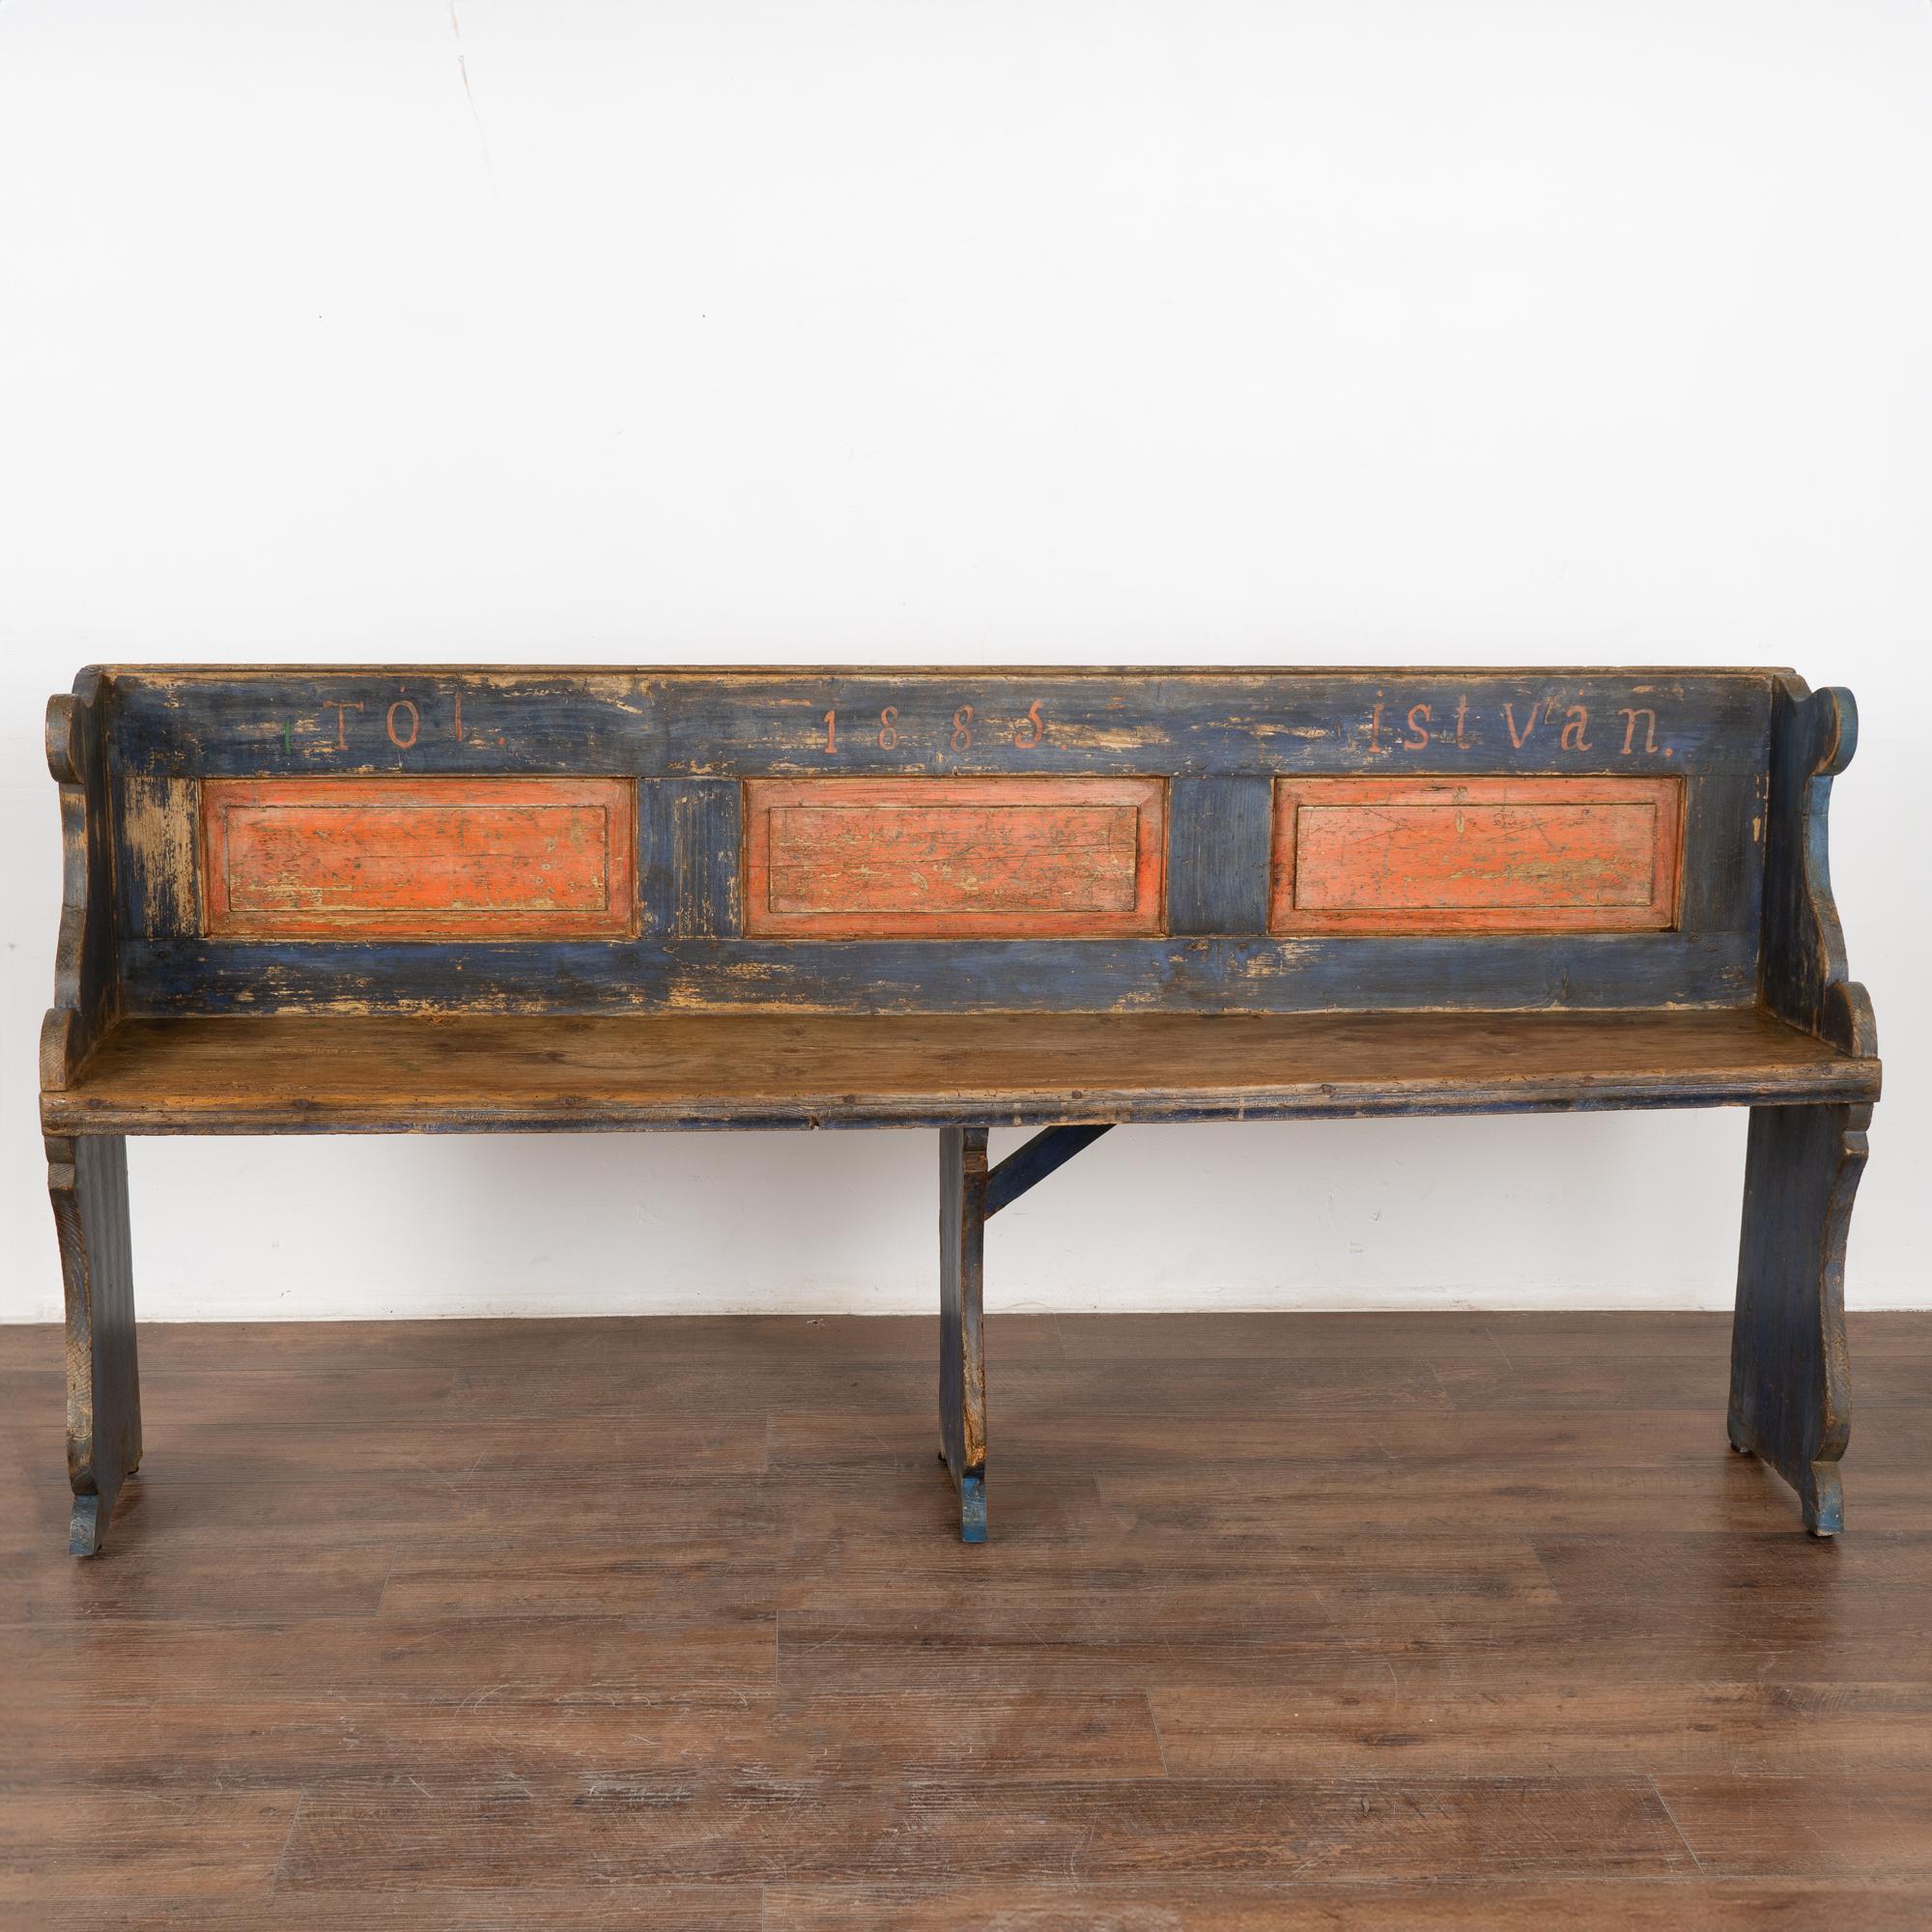 Country Original Blue Painted Narrow Pine Bench, Hungary dated 1885 For Sale